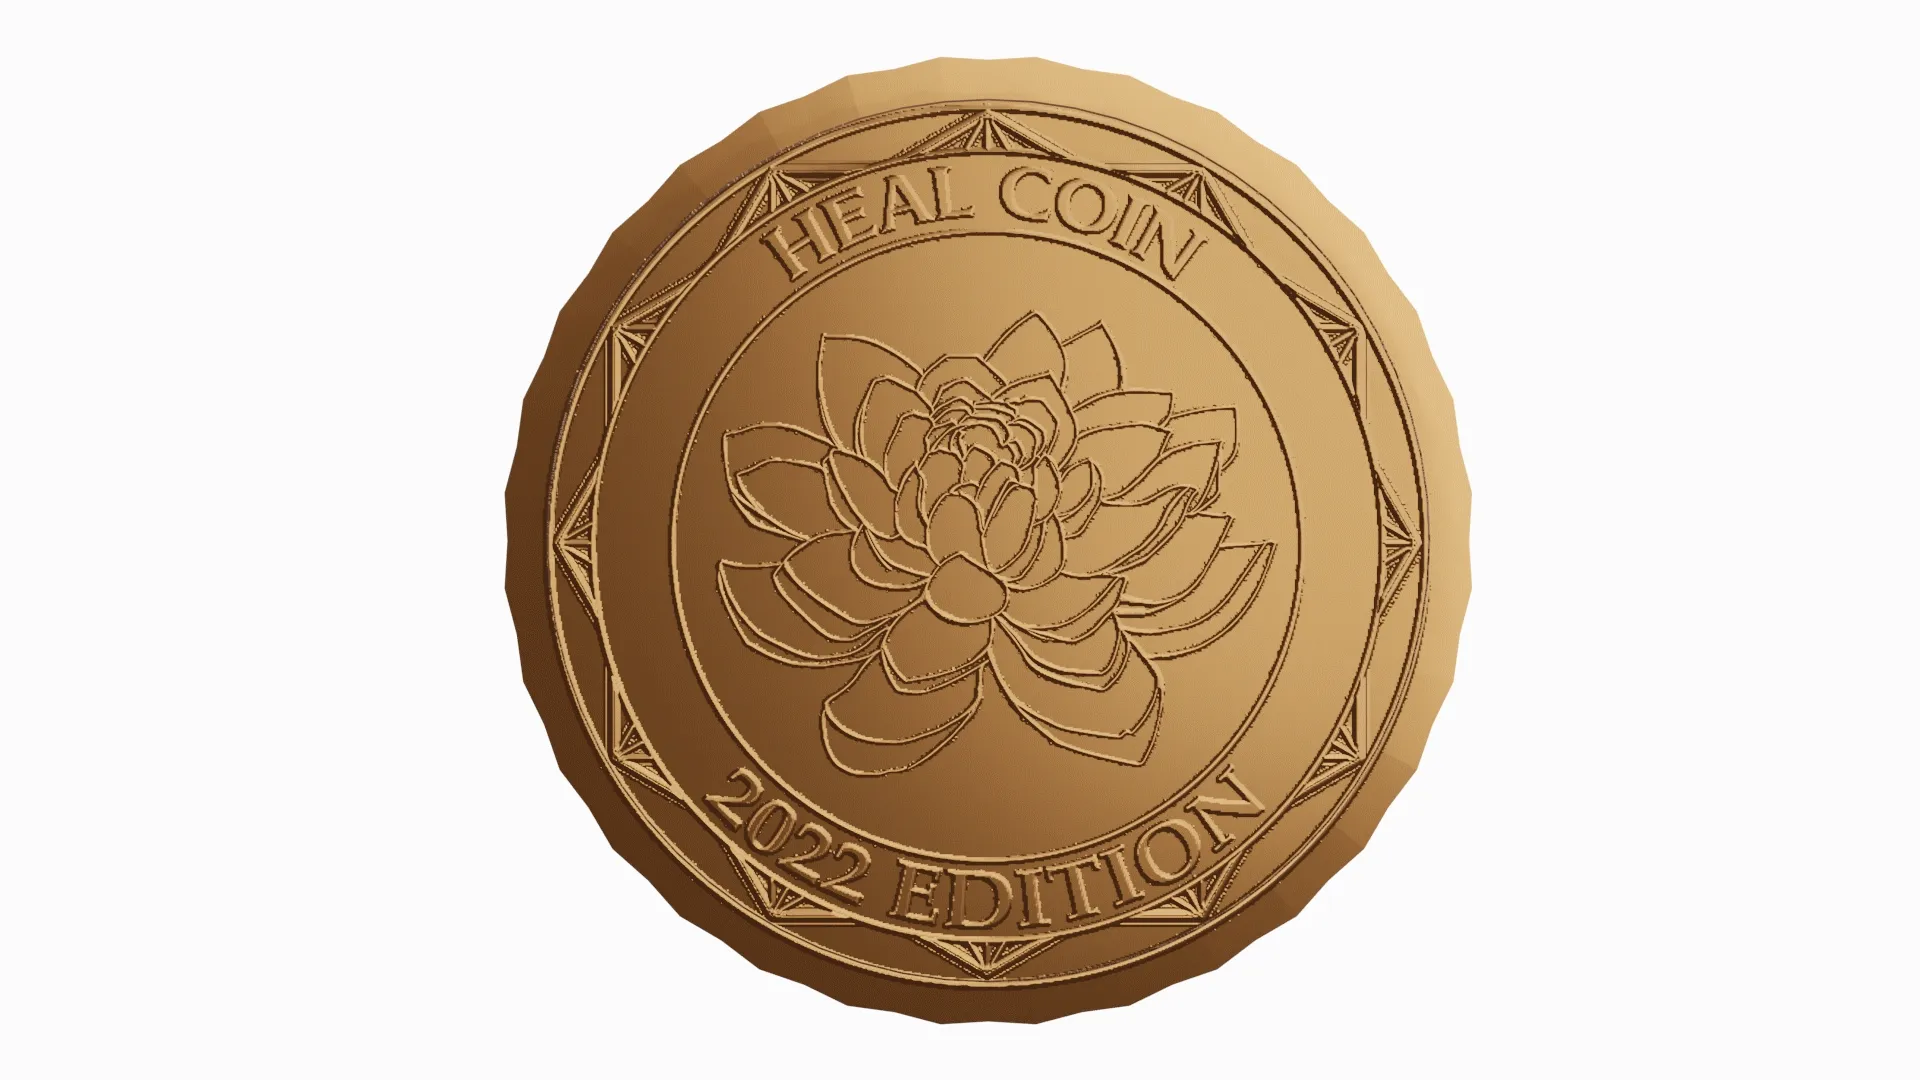 THE HEAL COIN - 2022 EDITION